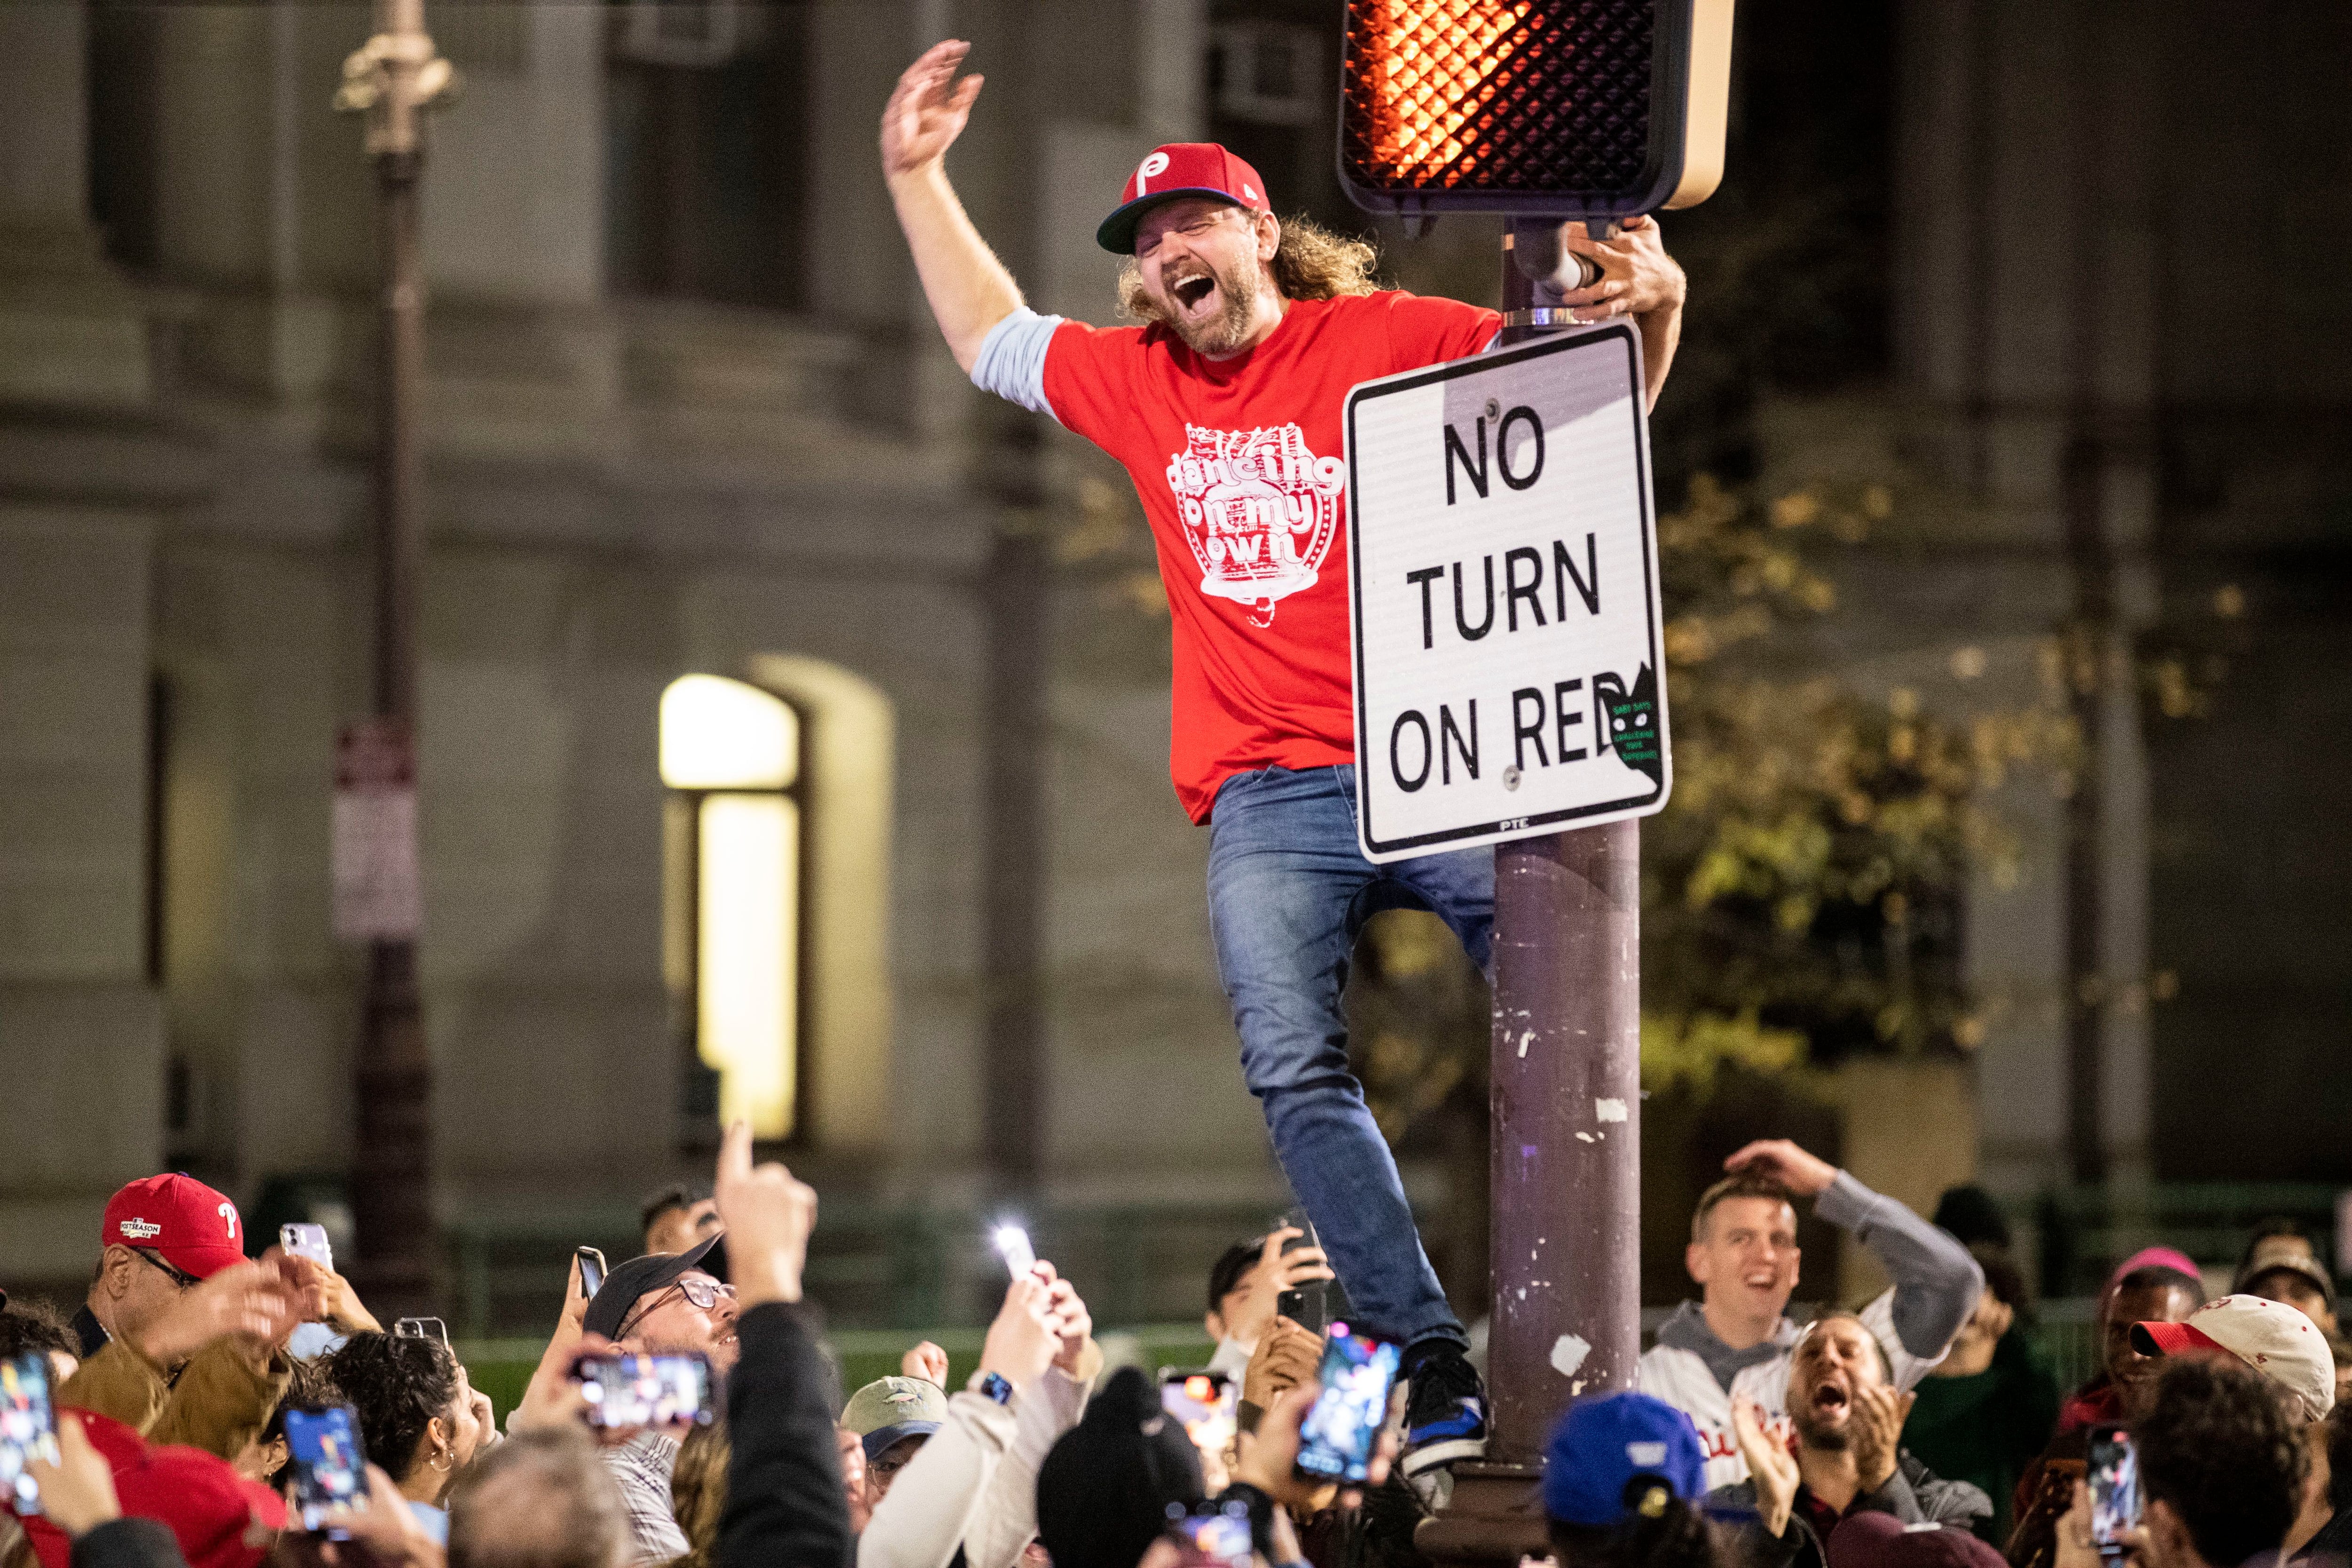 Phillies fans celebrate wildly in street after reaching World Series